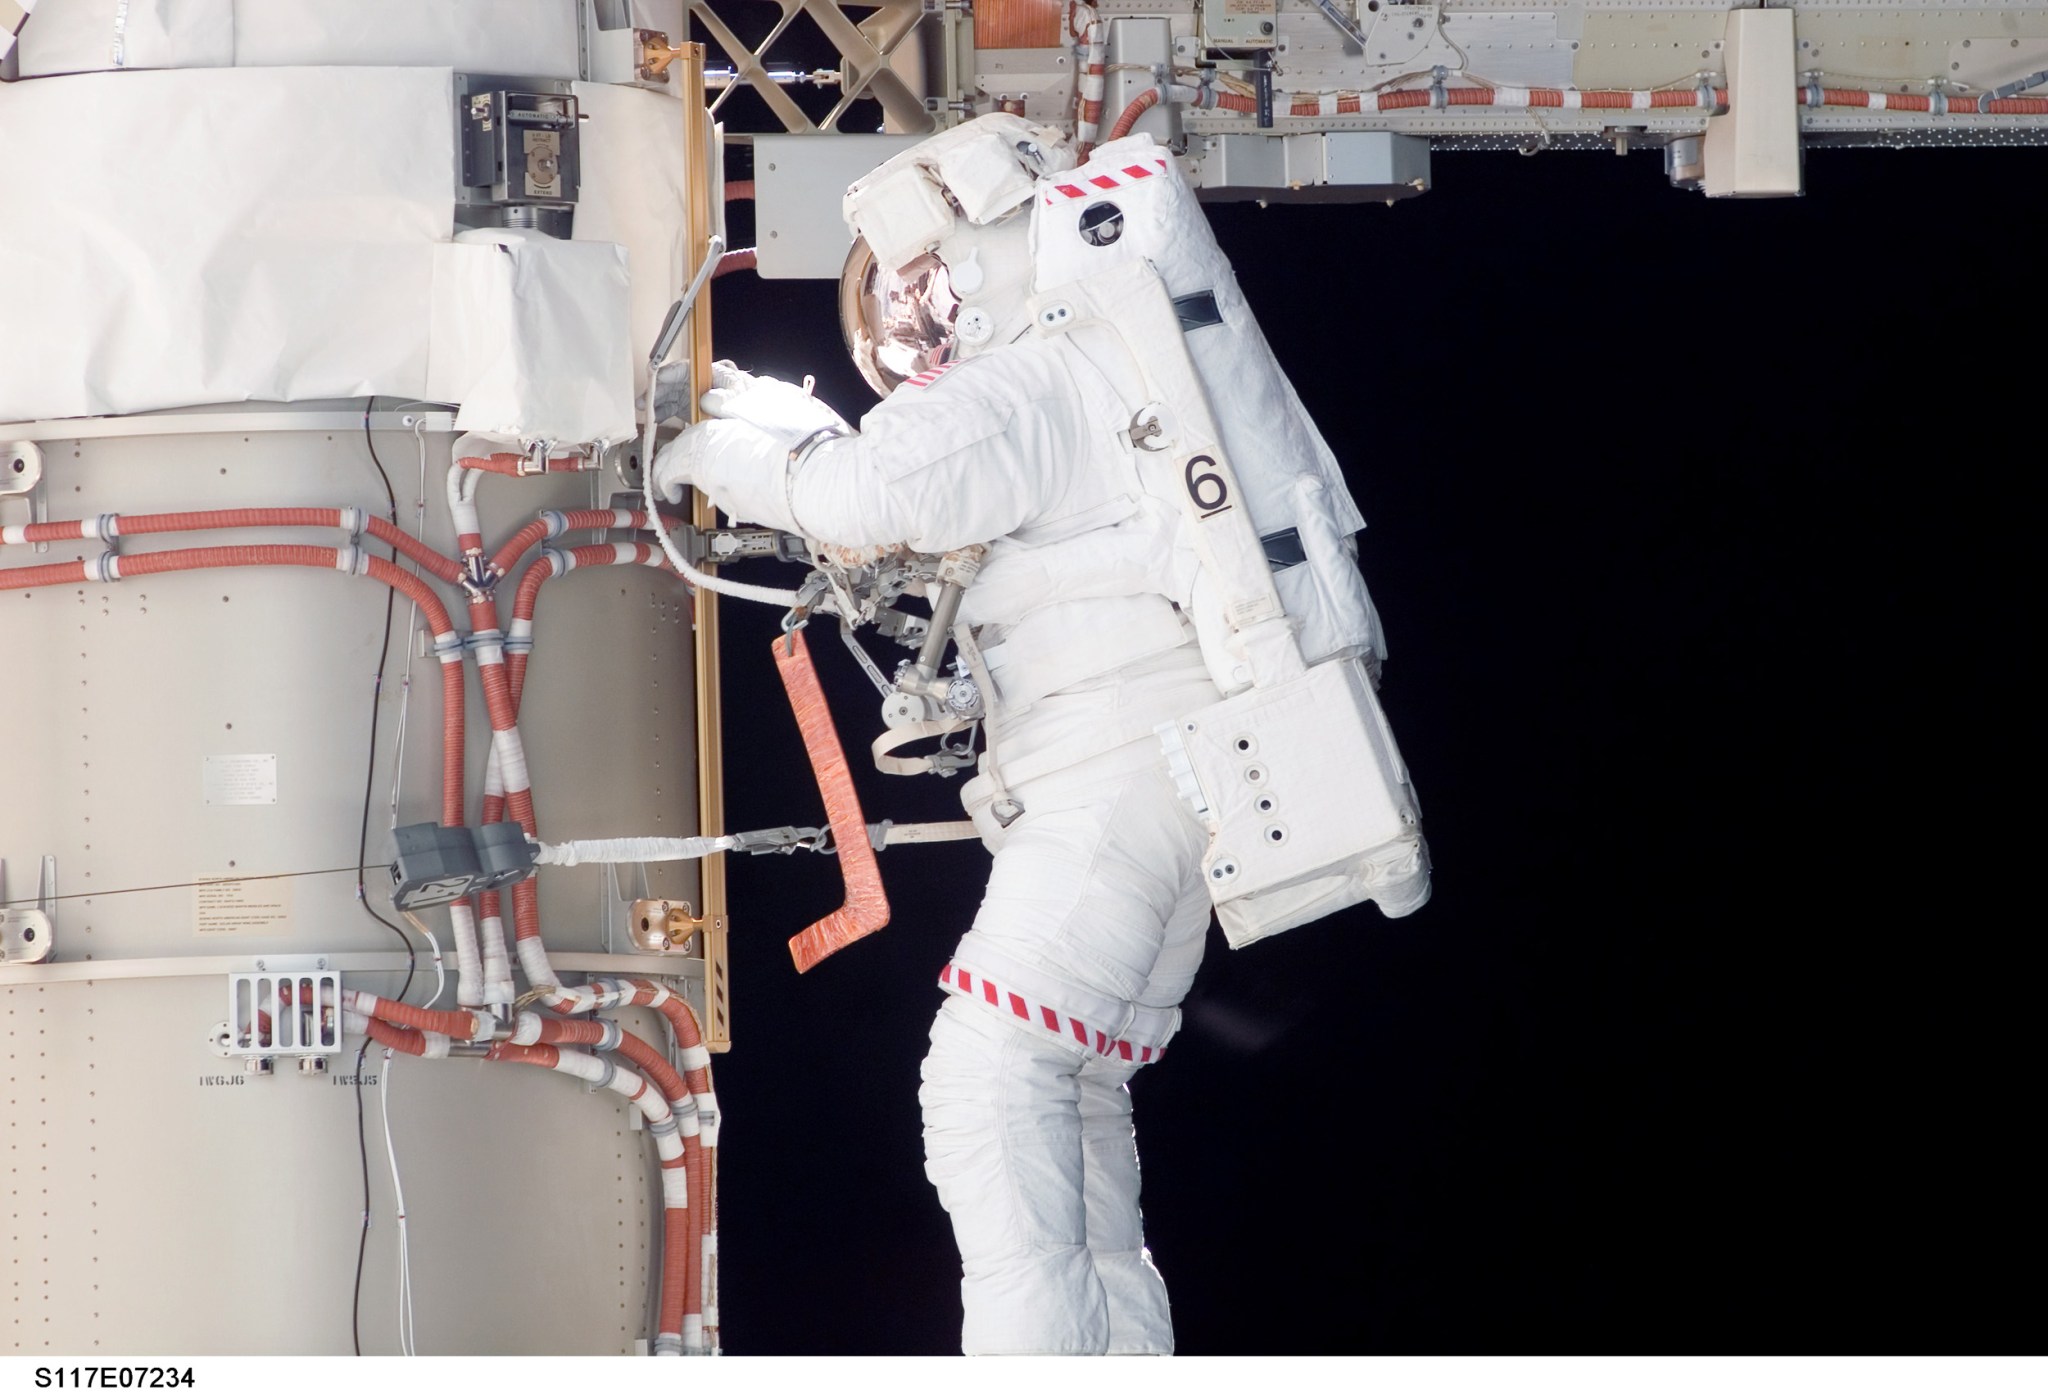 Steven Swanson completes a spacewalk outside the International Space Station while wearing a spacesuit